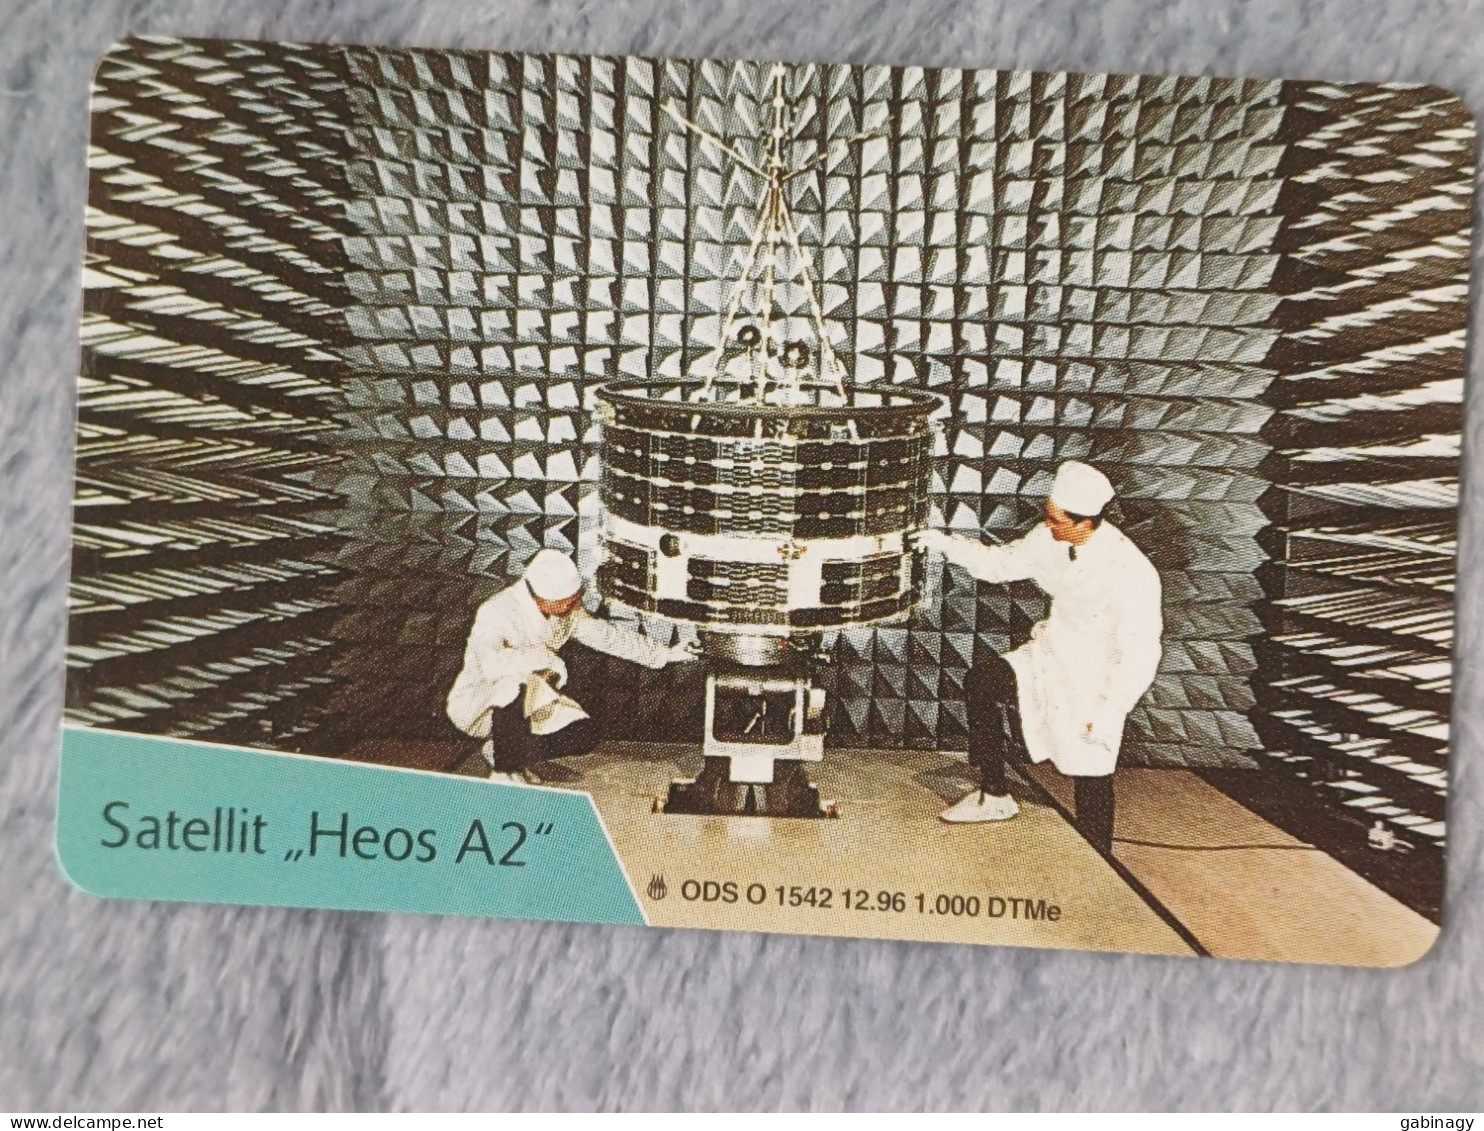 GERMANY-1080 - O 1542 - Eroberung Des Weltraums: Satellit "Heos A2" - SPACE - 1.000ex. - O-Series : Séries Client